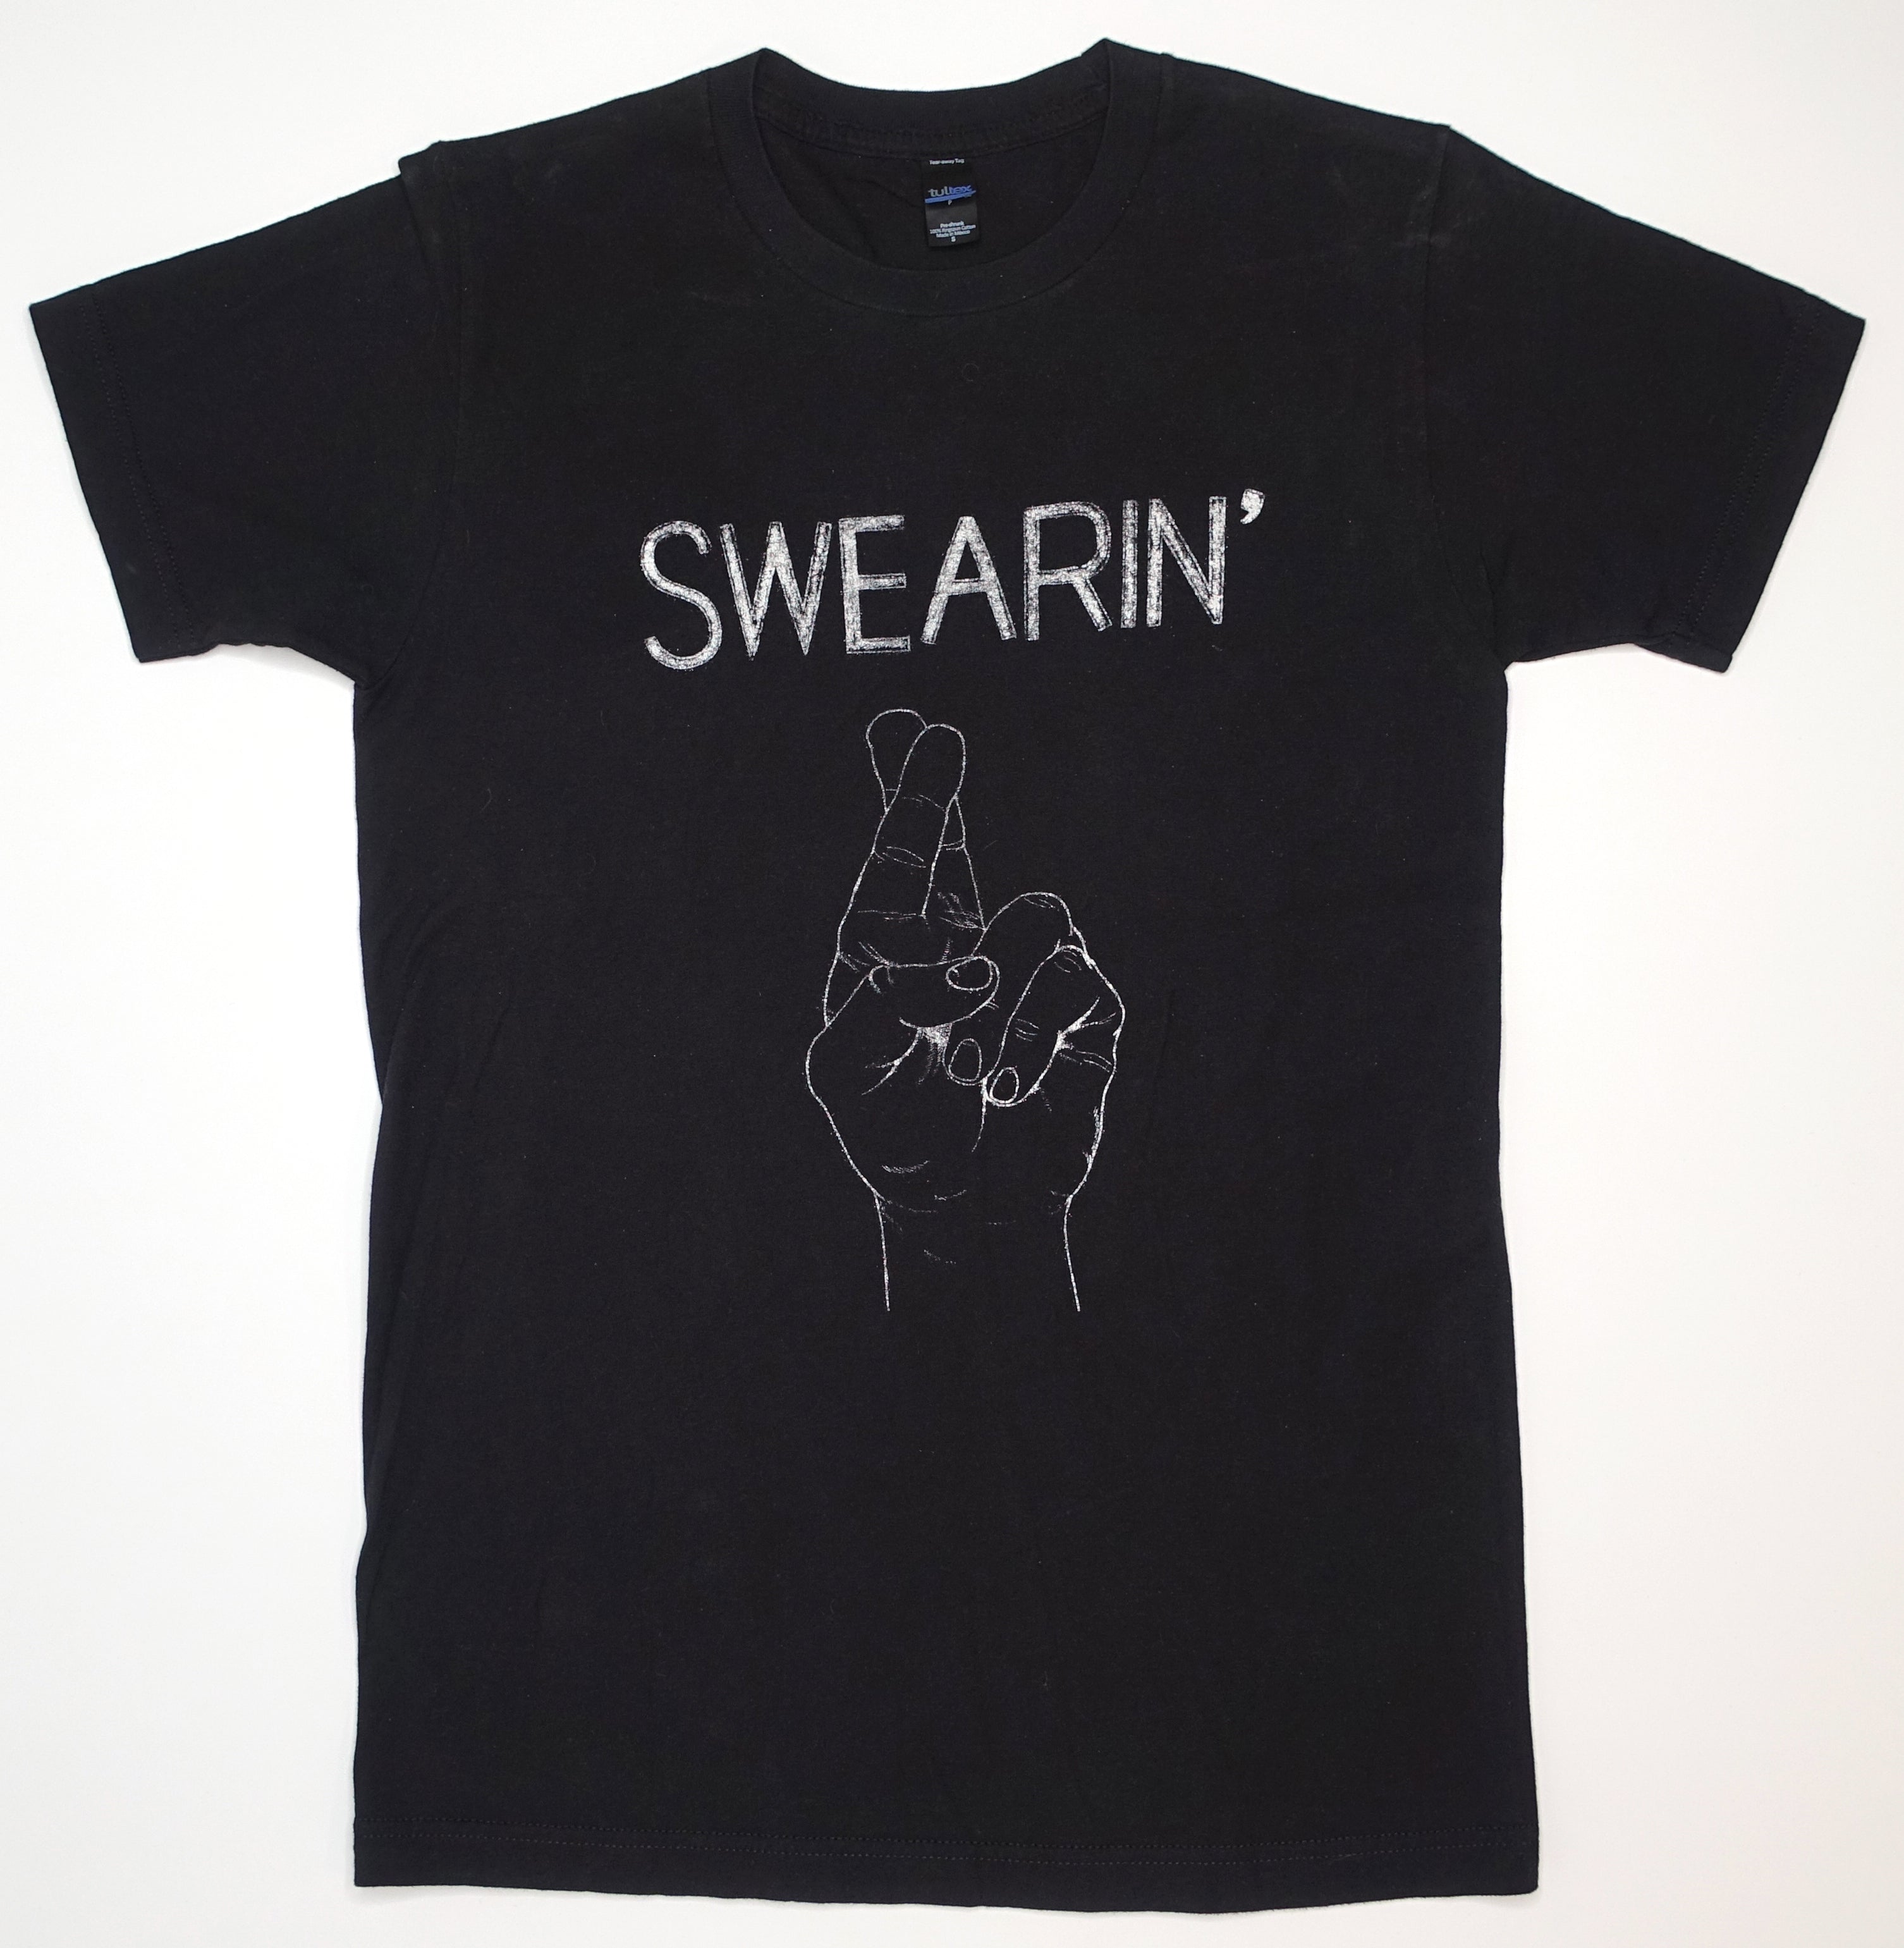 Swearin' - Fingers Crossed Tour Shirt Size Small